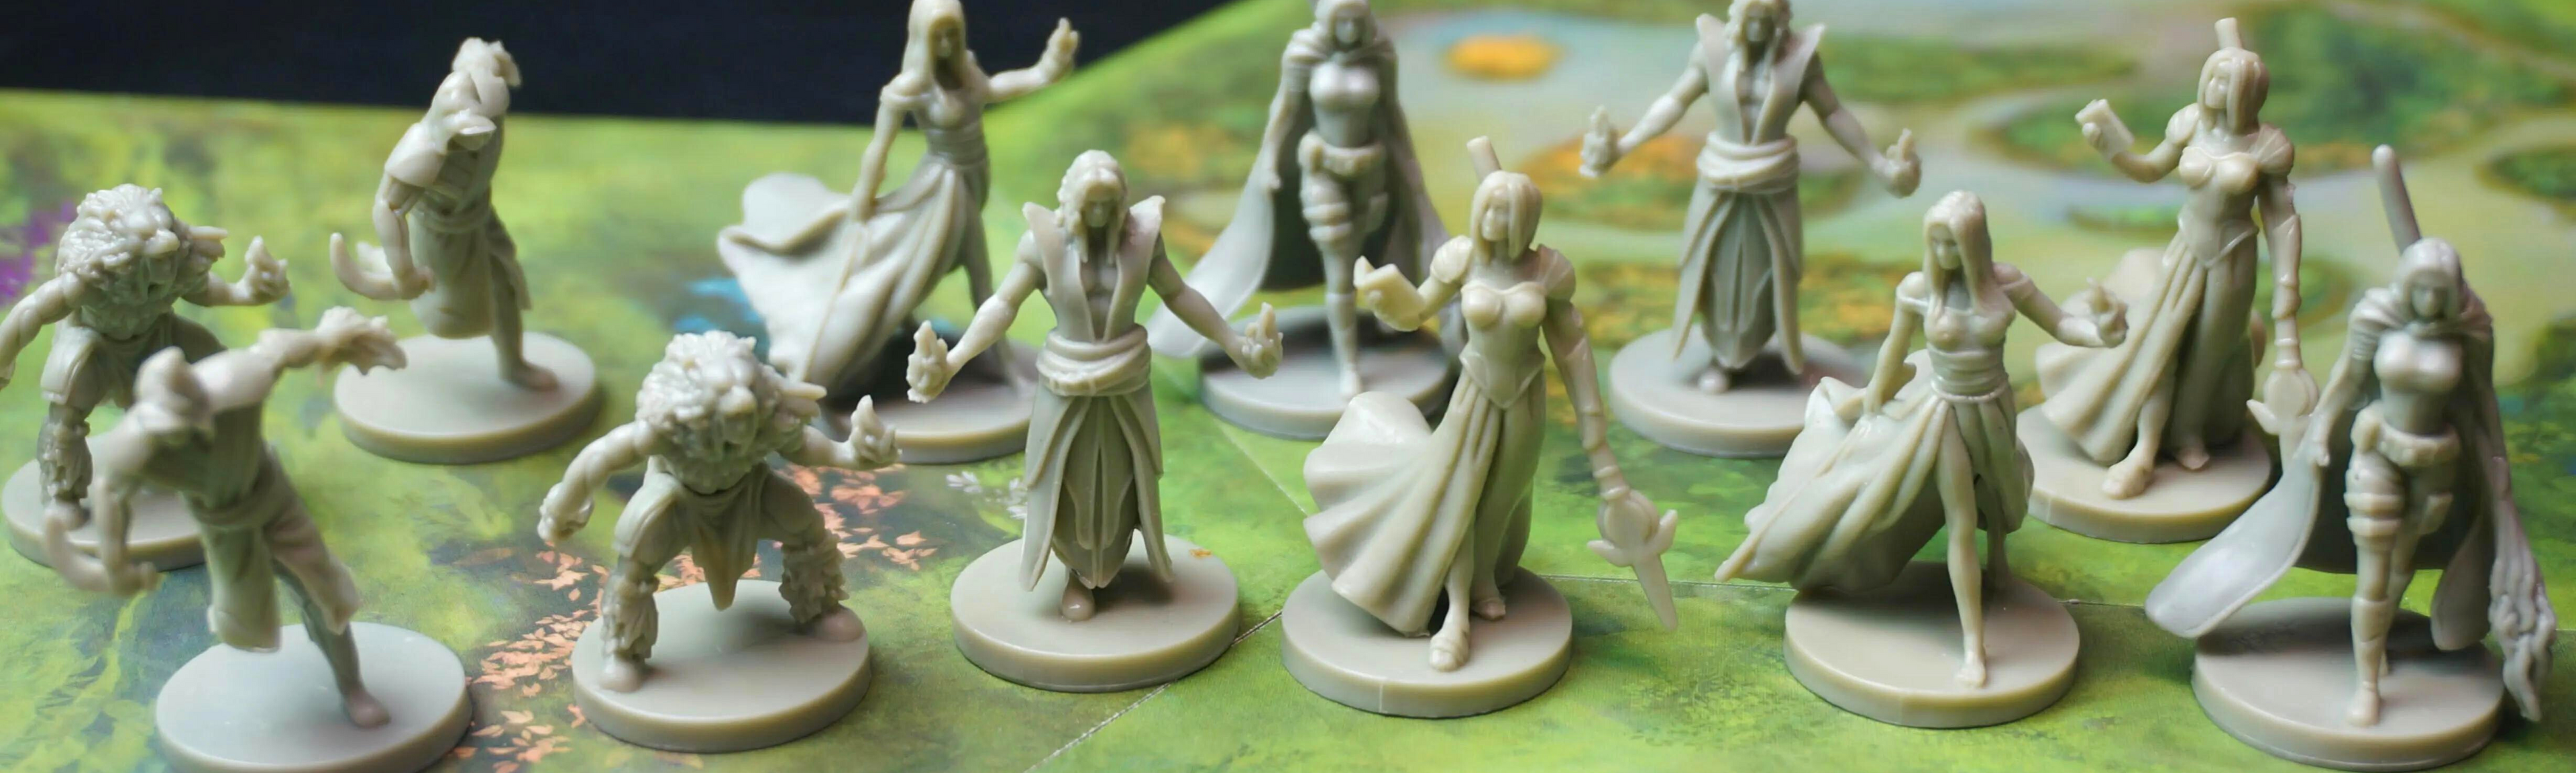 Board Game Miniatures